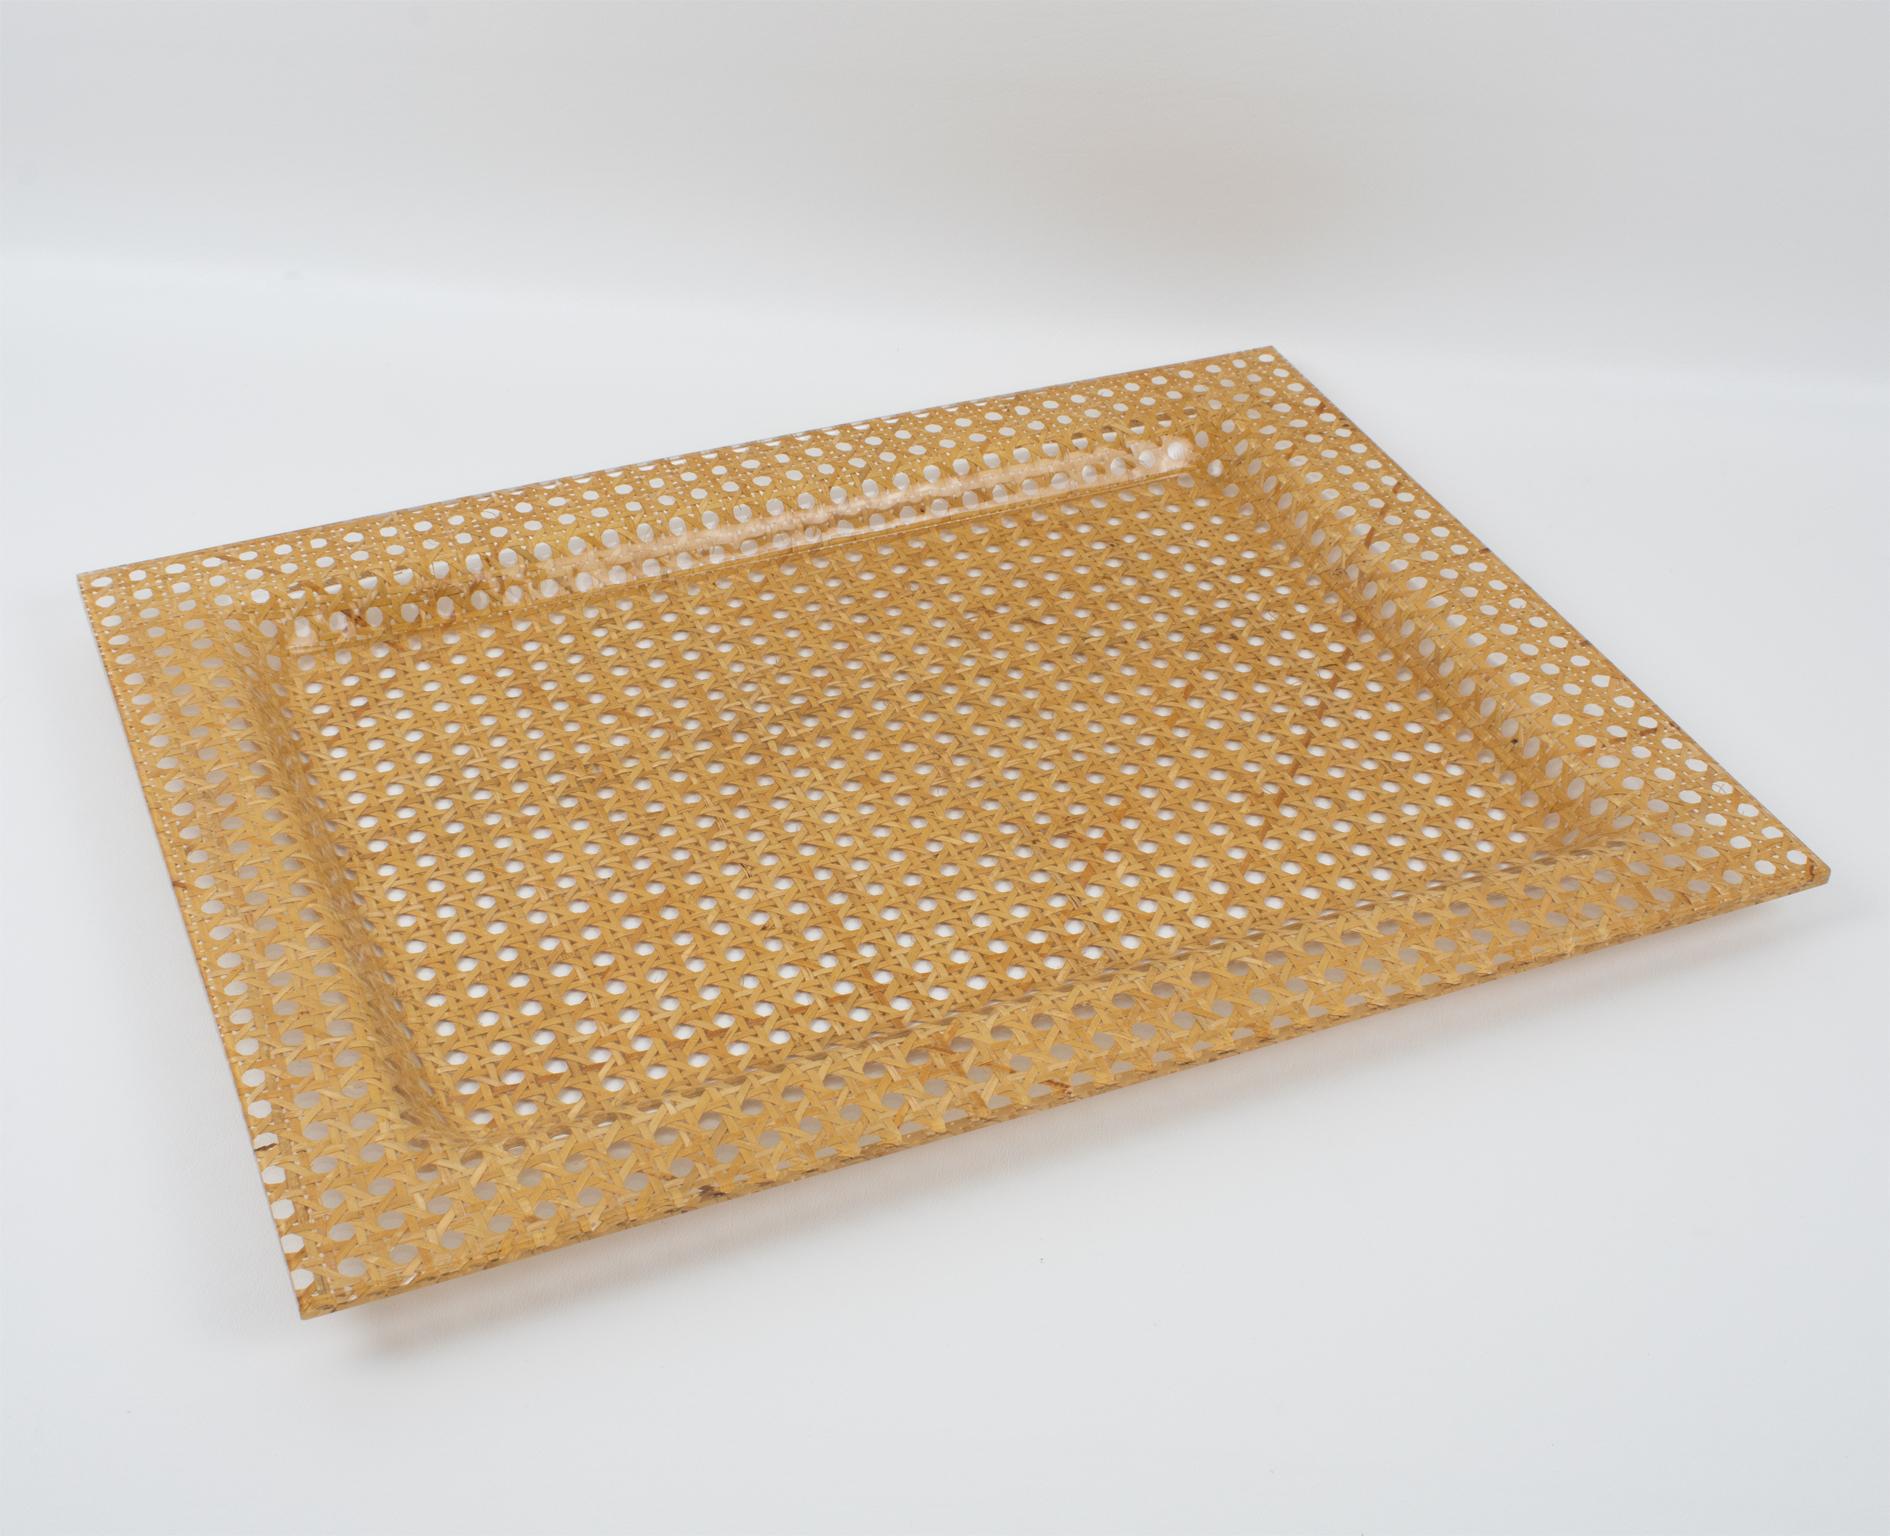 This stunning modernist barware serving tray or platter was crafted in Italy in the 1970s. The rectangular shape has raised edges built with two layers of clear Lucite or acrylic and between a layer of rattan, wicker, or cane-work and geometric